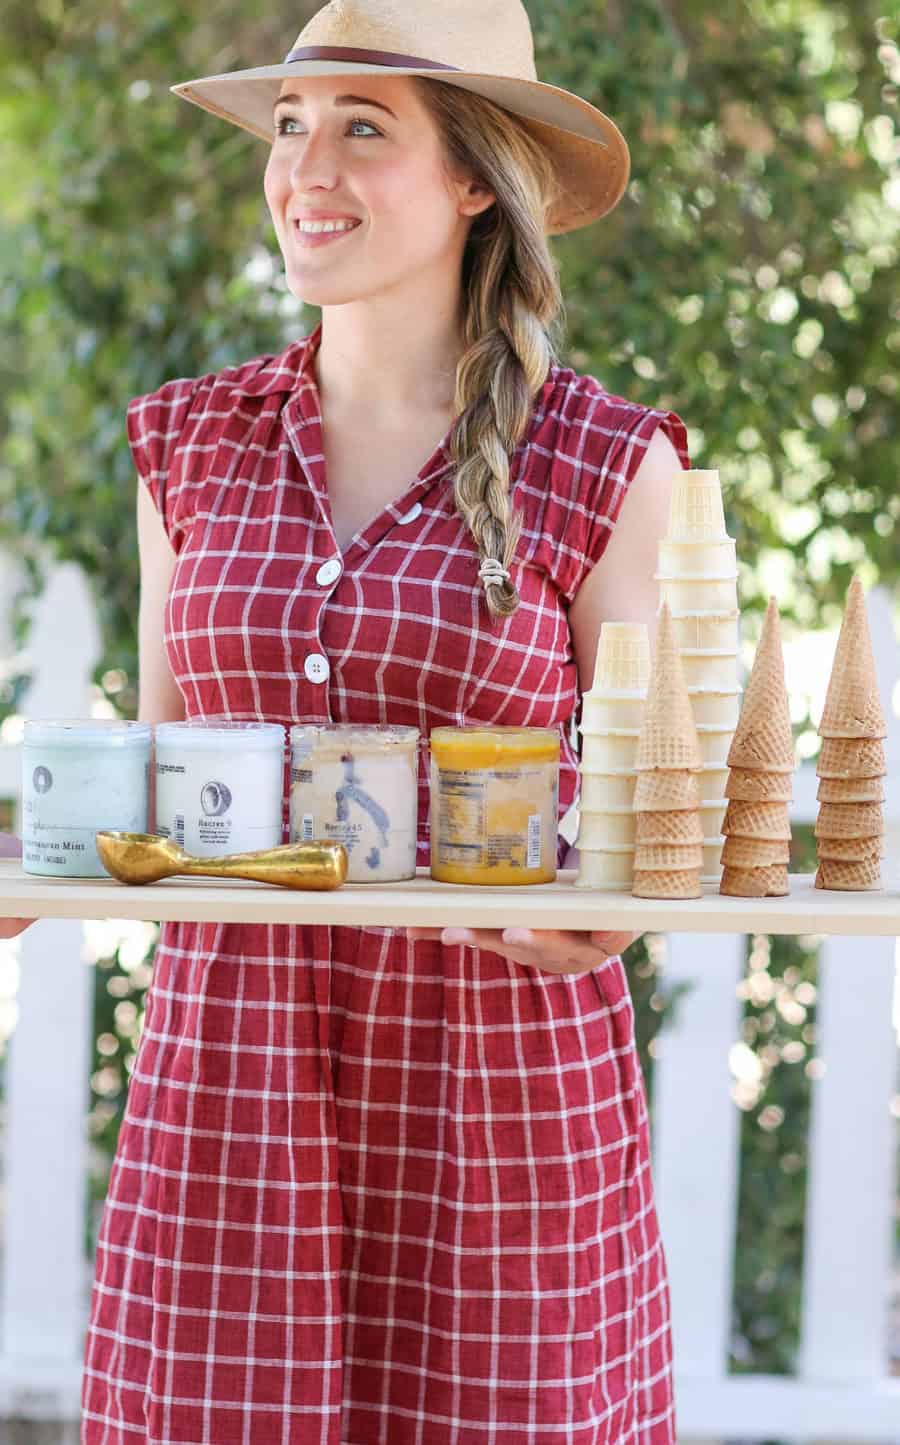 Eden Passante holding a tray of ice cream and cones.